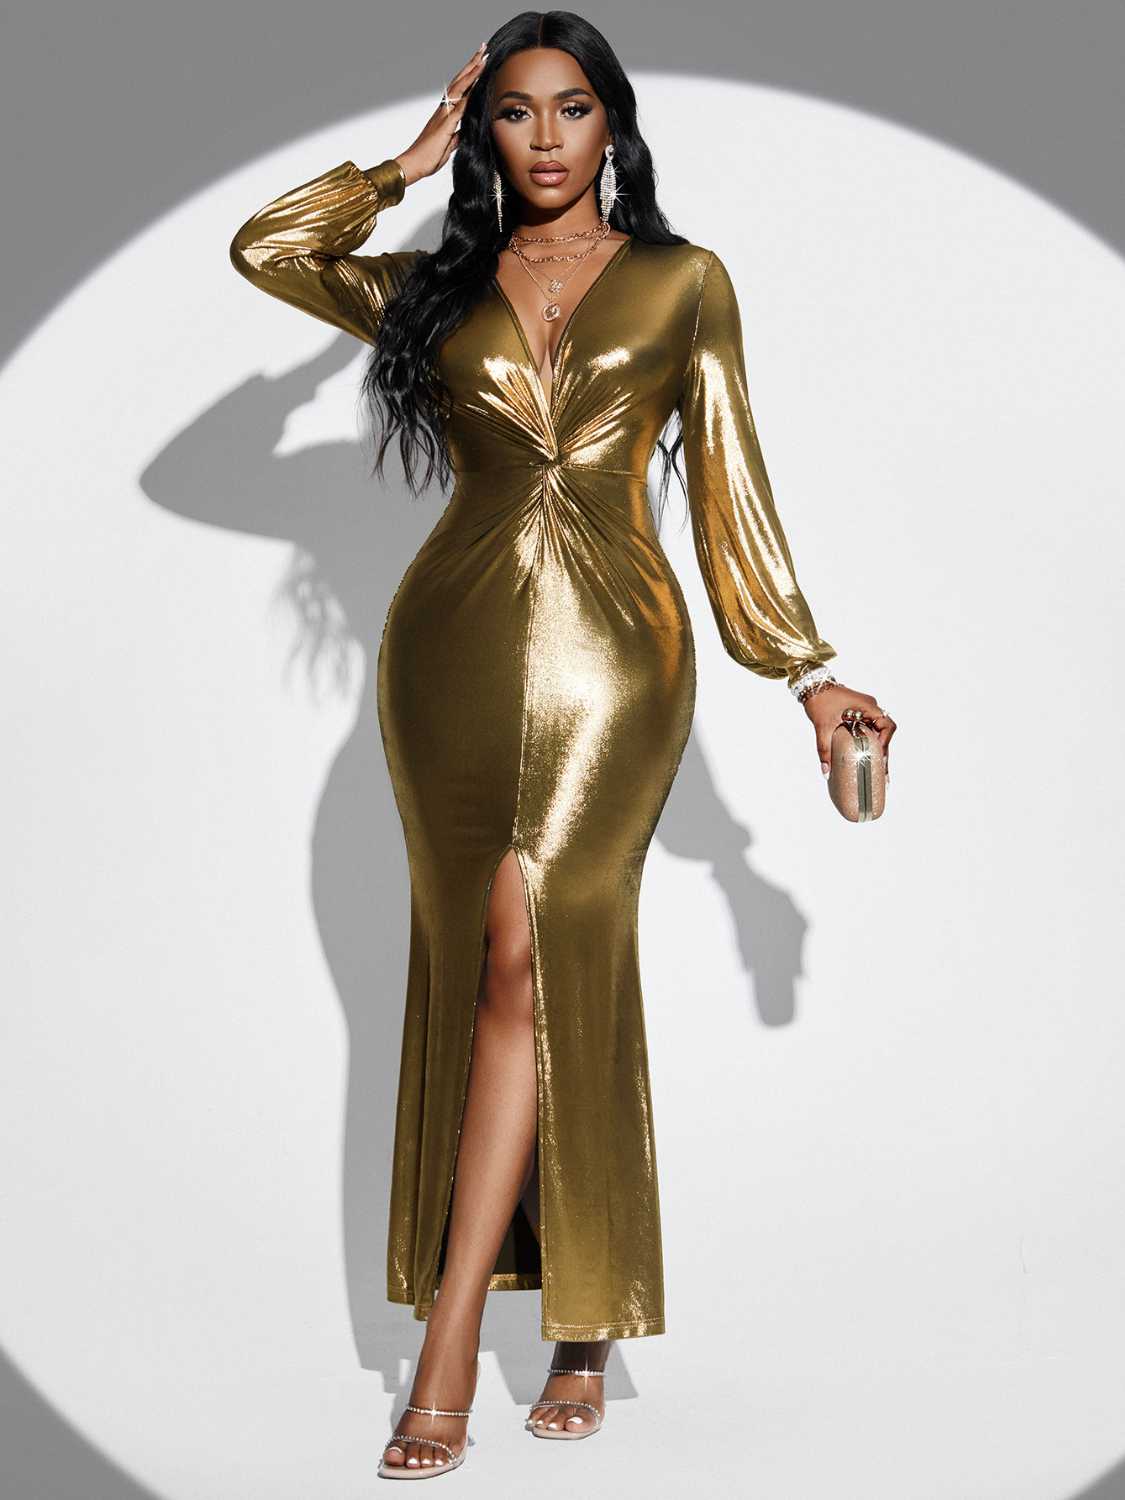 a woman in a gold dress posing for a picture